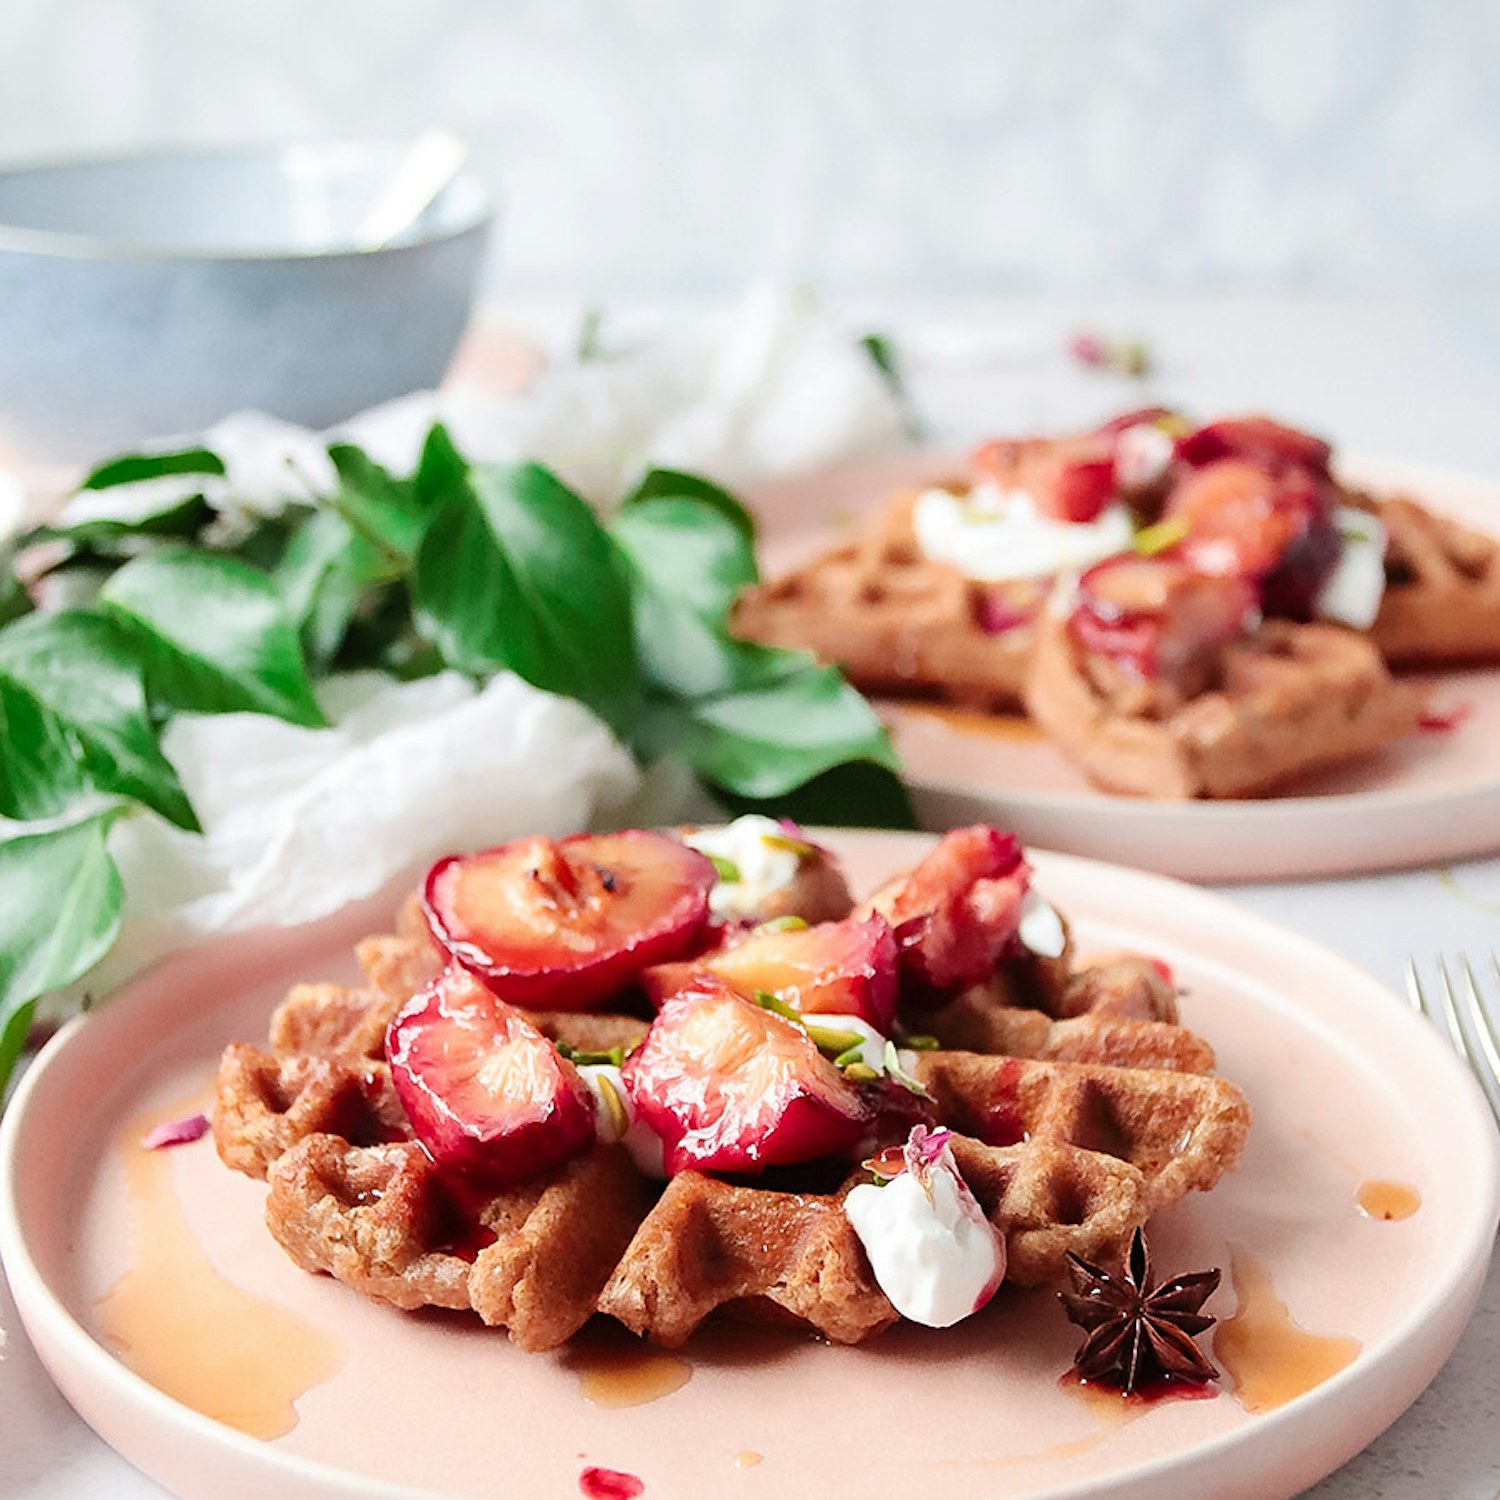 Buckwheat Waffles with Baked Plums